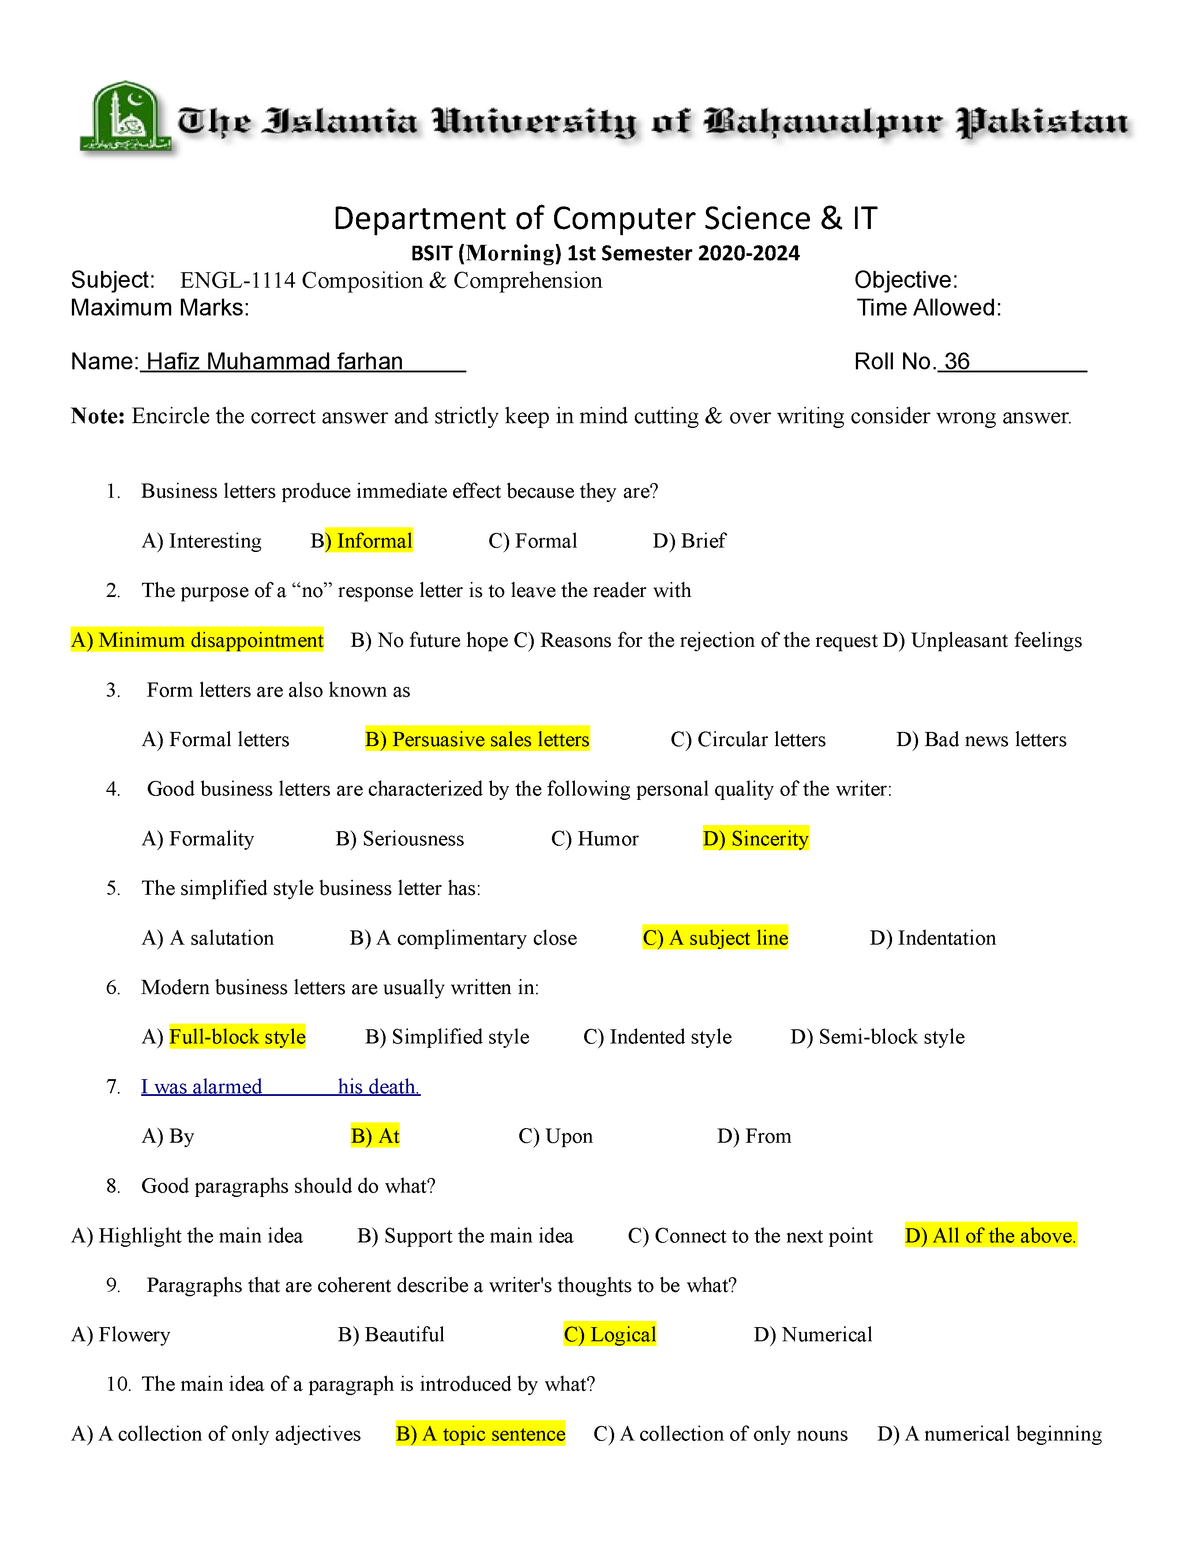 assignment science computer matriculation